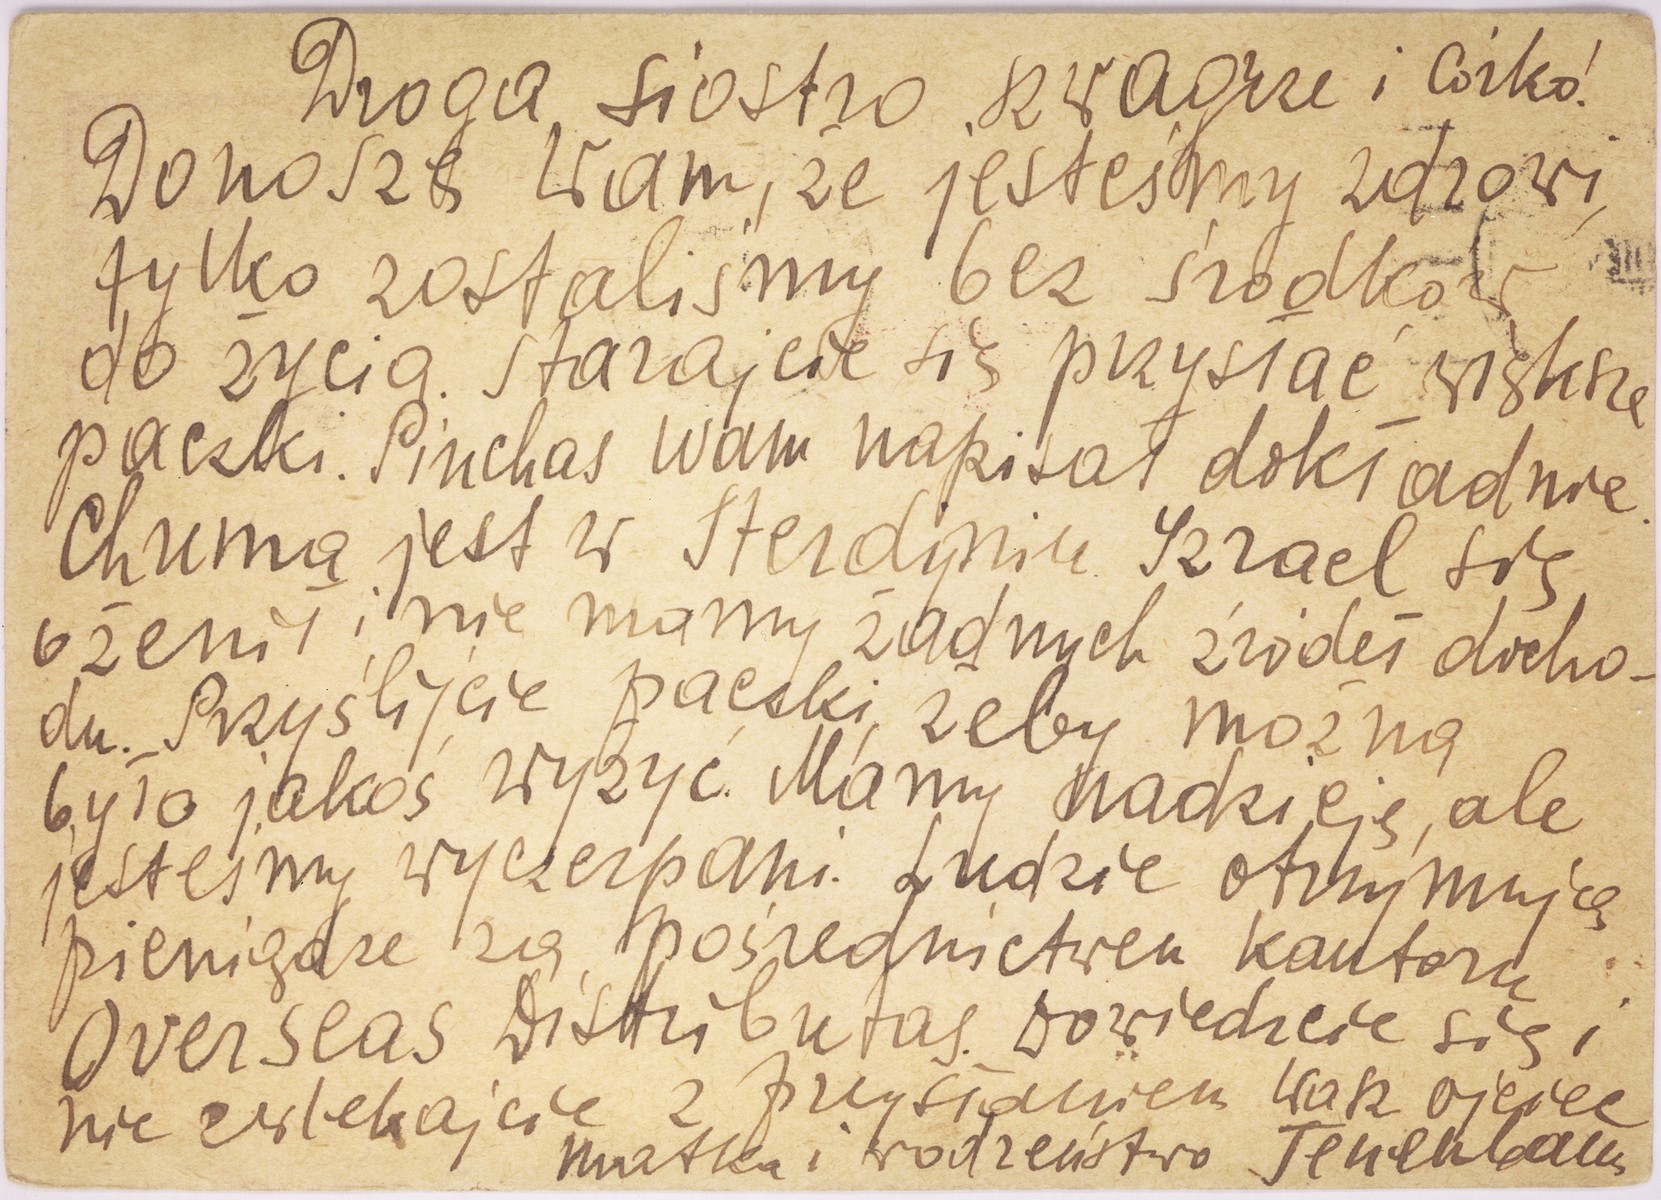 A postcard sent by Jonas and Anka Leah Tenenbaum in the Warsaw ghetto to Anka's sister and daughter in Chicago. 

The Polish text reads: "To my dear sister, brother-in-law and daughter.  We are healthy but we have no means of support.  Please send bigger food parcels.  Nechama is in Sterdyn, Srulik got married, and we have no income. Please send food for us to survive.  We still have hope, but we are exhausted.  Other people receive money through Overseas Distributors.  Find out about it.  Don't wait to send food.  With love, your father, mother and siblings Tenenbaum."